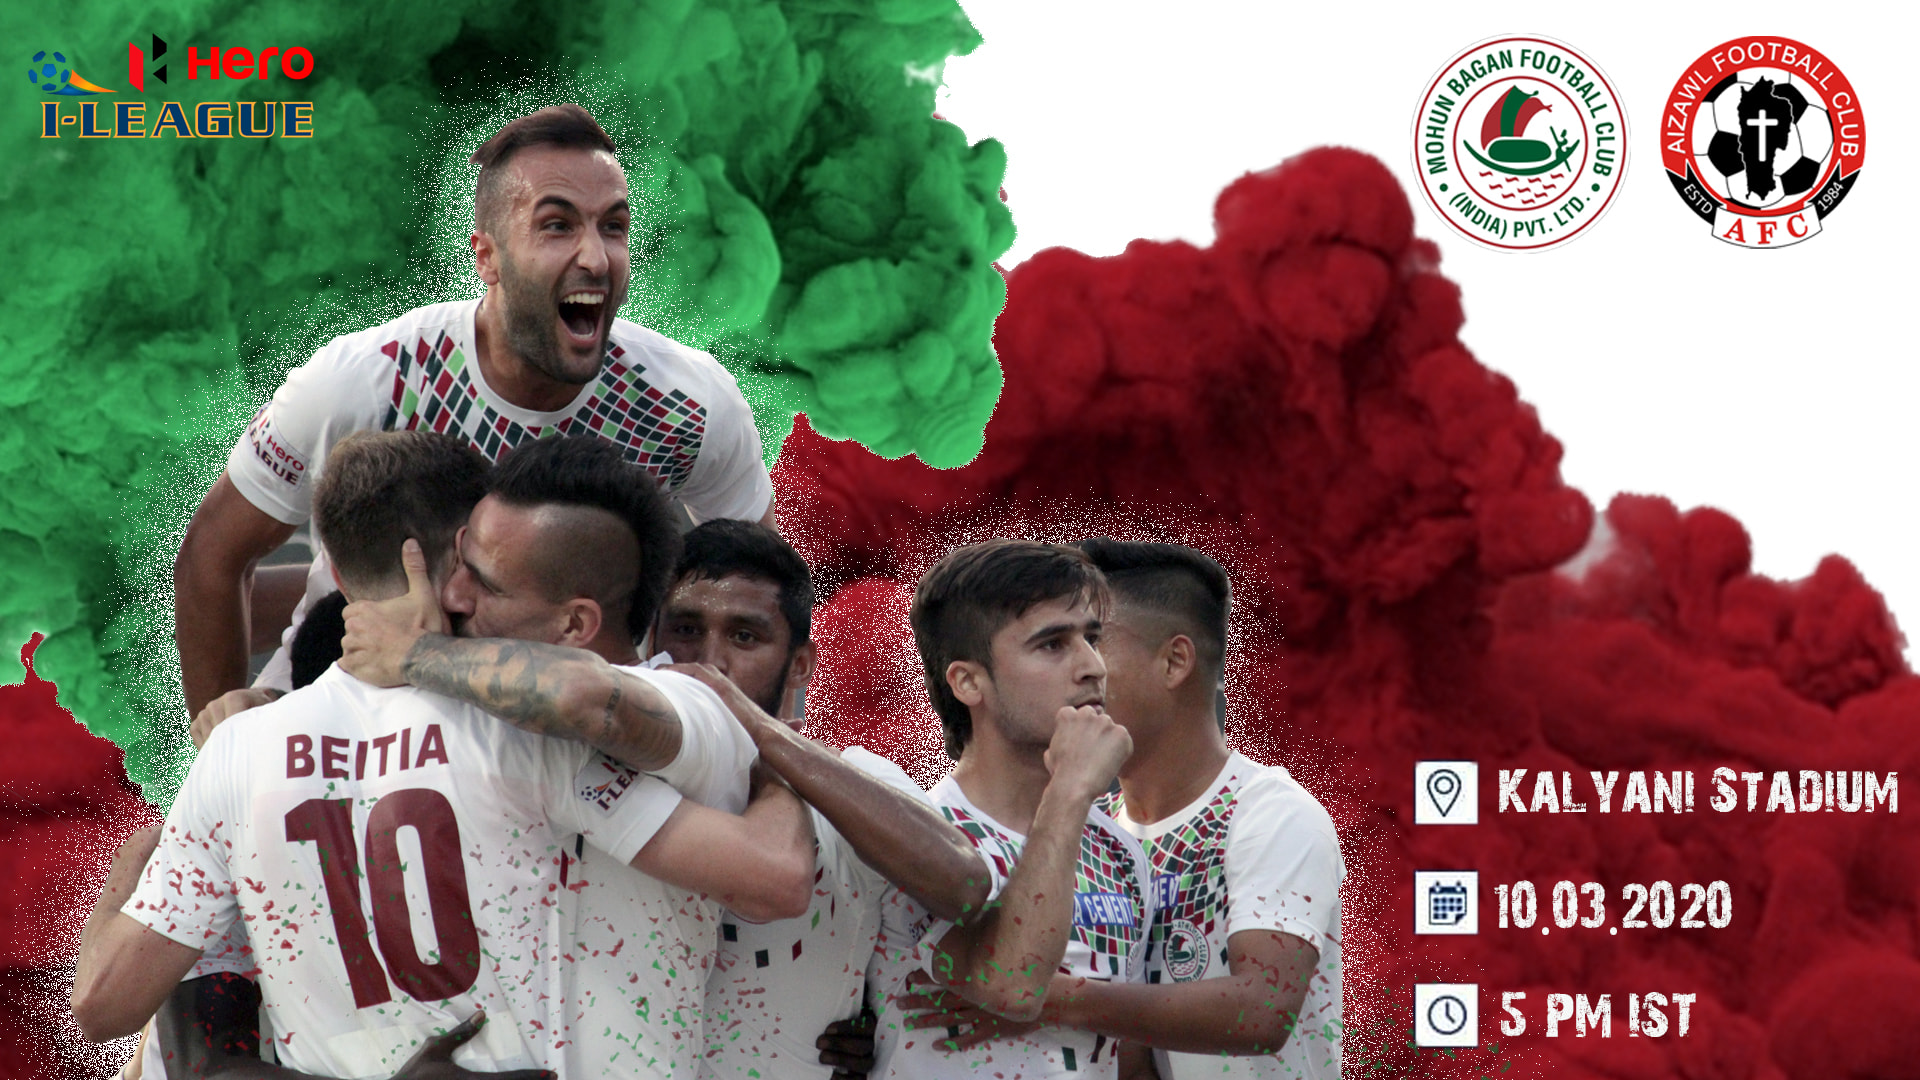 Mohun Bagan just need a win against former champions to win their second I-League title in five years.